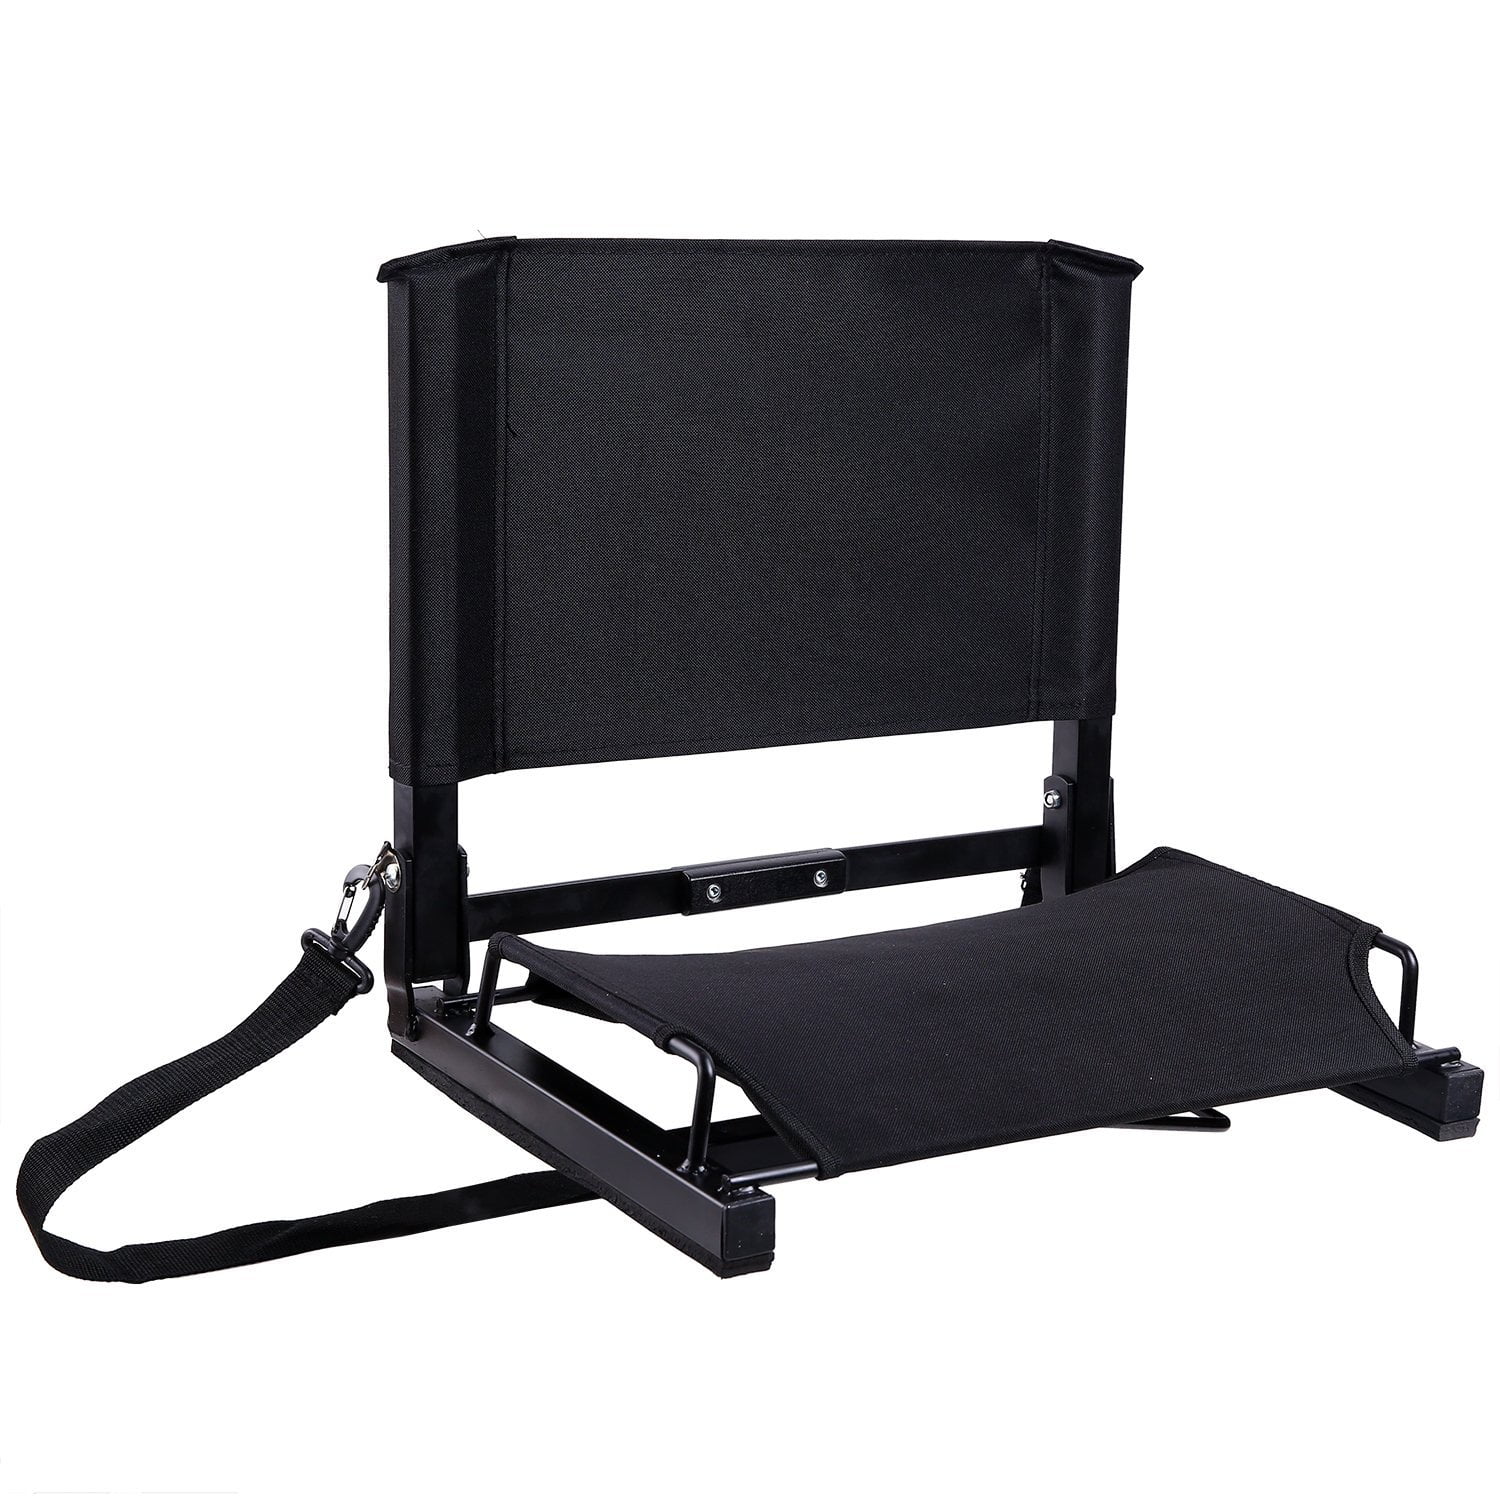 Bleacher Seats with Padded Active Foam Backs and Cushion OSPORTIS Stadium Seats for Bleachers Portable Stadium Seats with Back Support and Shoulder Strap